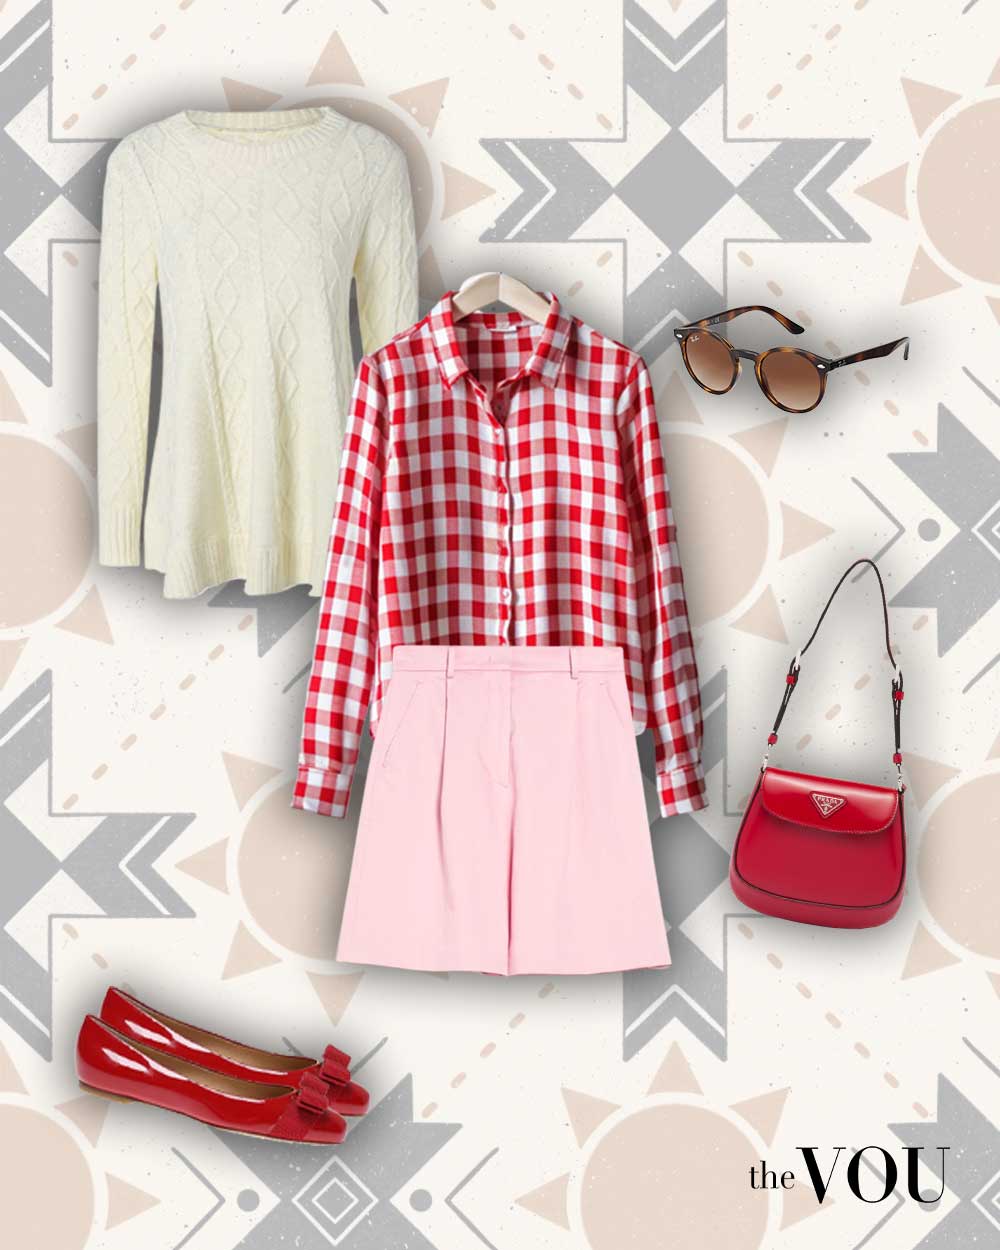 cable knit sweatshirt in white, long-sleeve button-down collar blouse with gingham pattern, round shaped sunglasses with animal pattern, linen Bermuda shorts with darts in pastel pink, soulder bag in red patent leather, ballet flats with a bow on the front in red patent leather